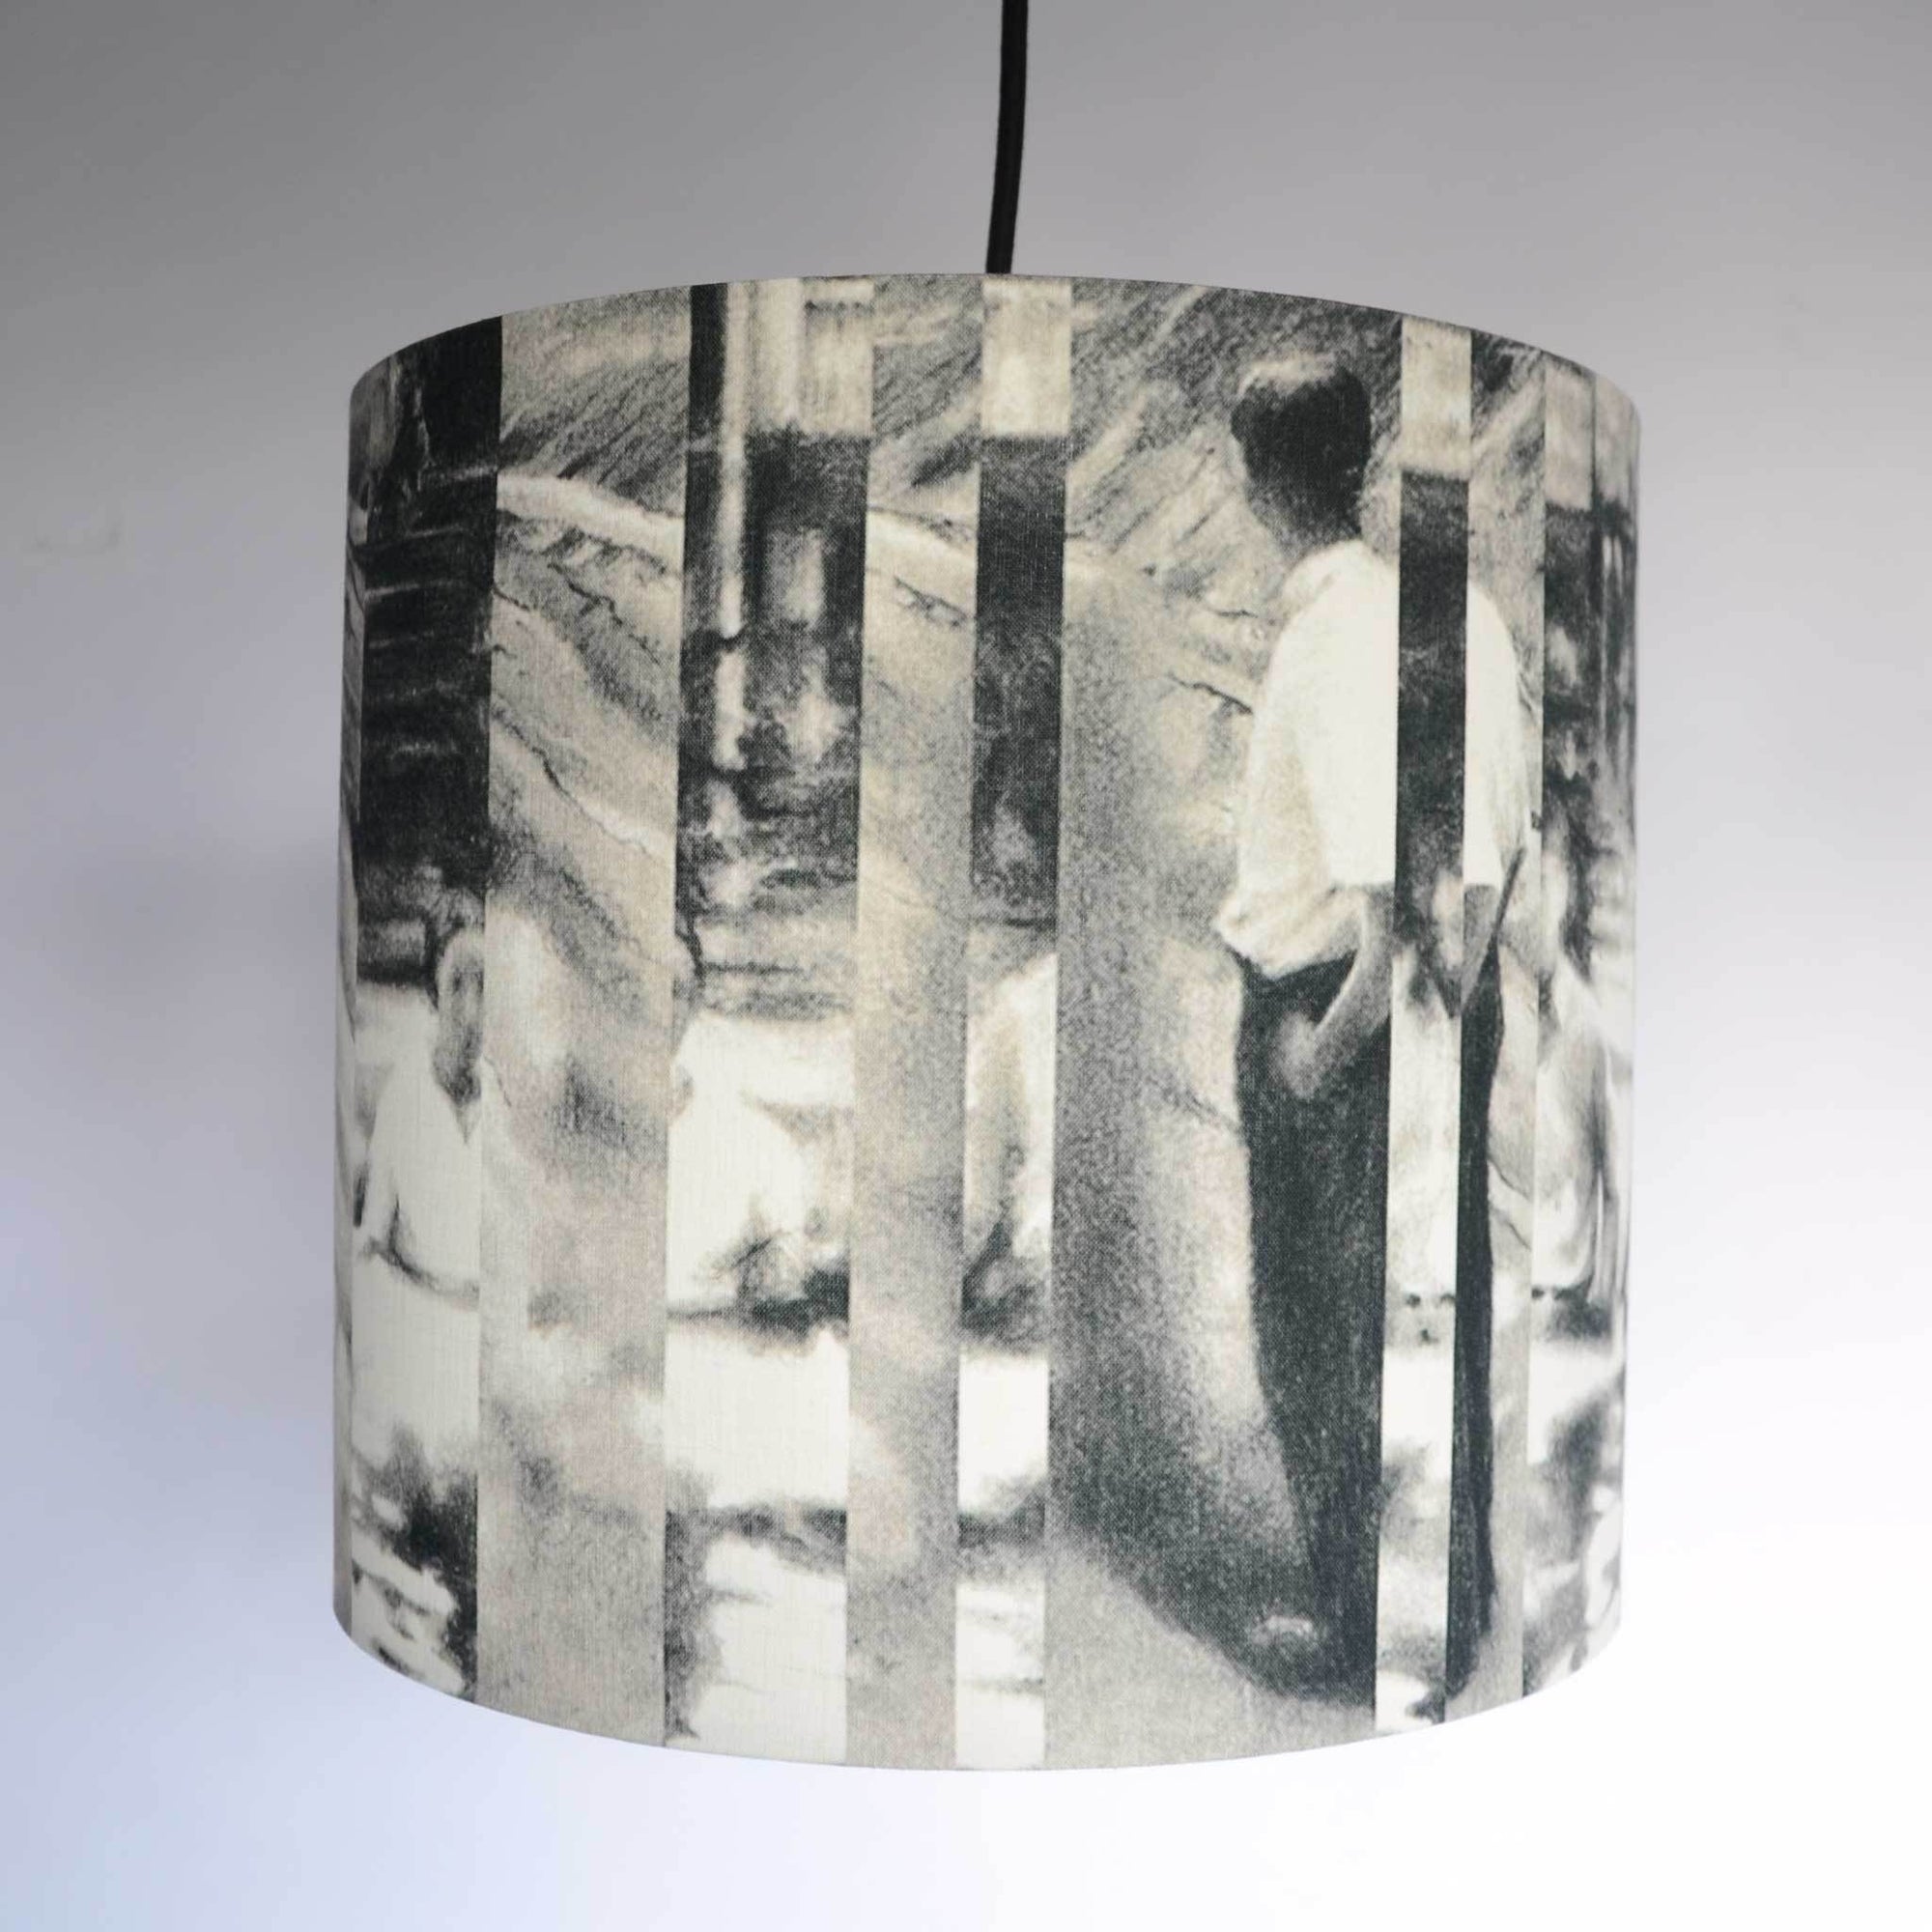 Table lamp with grey fabric lampshade at Wilson Contemporary art Gallery in Harrogate